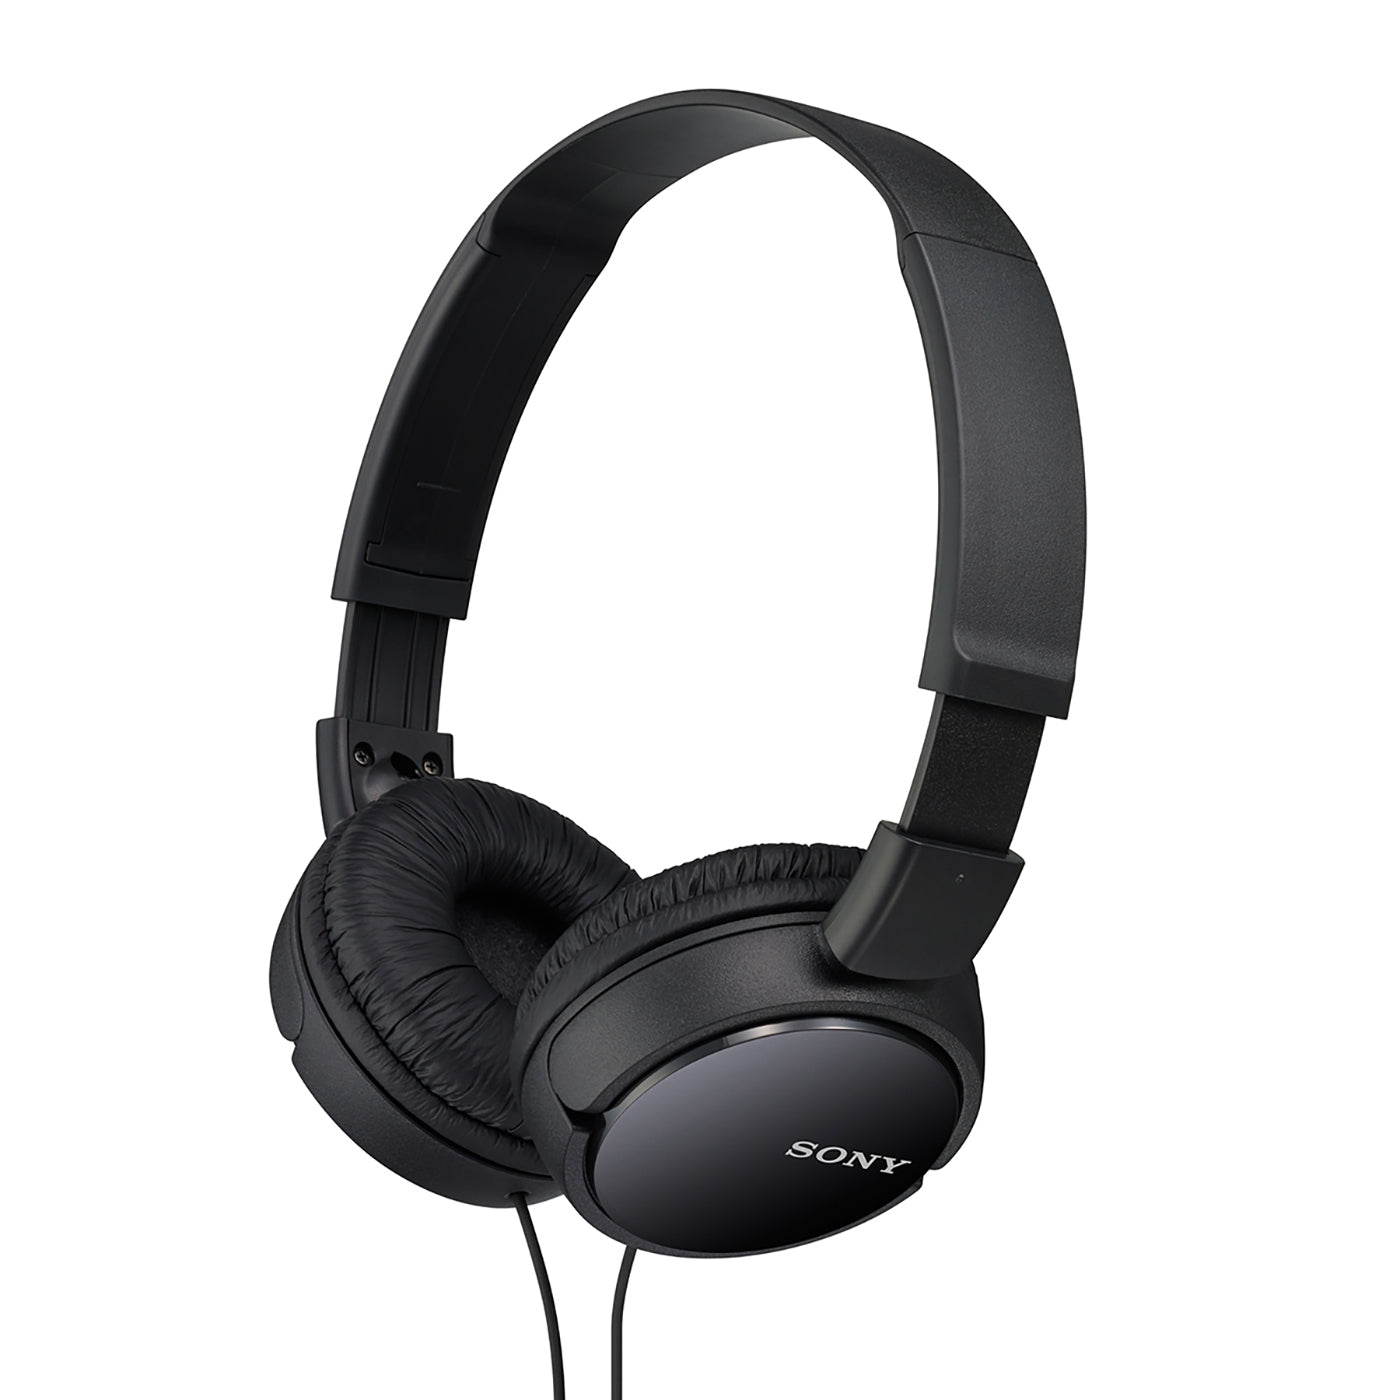 Sony MDR-ZX110 On-Ear Stereo Headphones with Tangle Free Cable (Black)